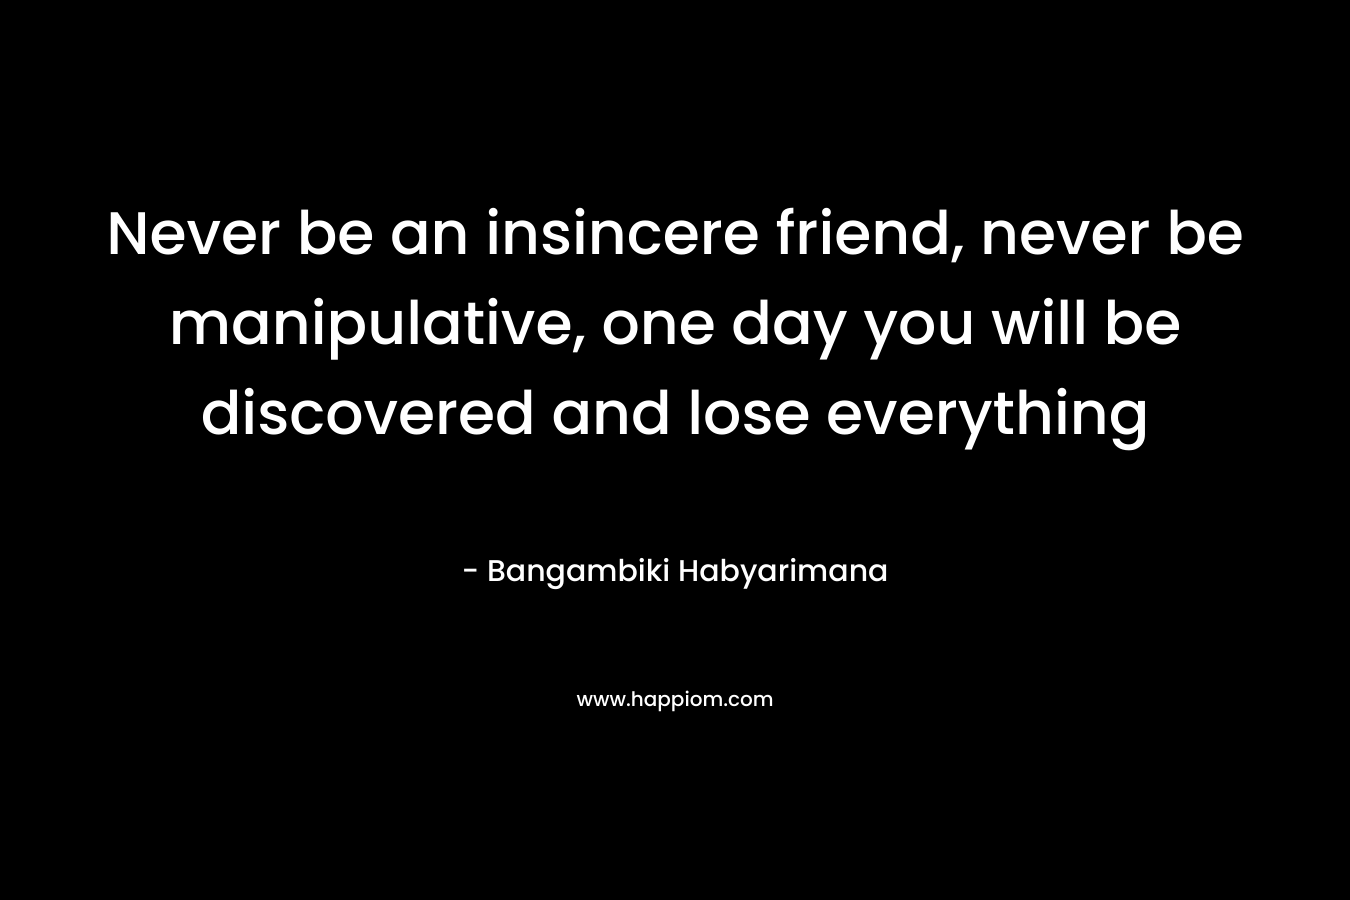 Never be an insincere friend, never be manipulative, one day you will be discovered and lose everything – Bangambiki Habyarimana